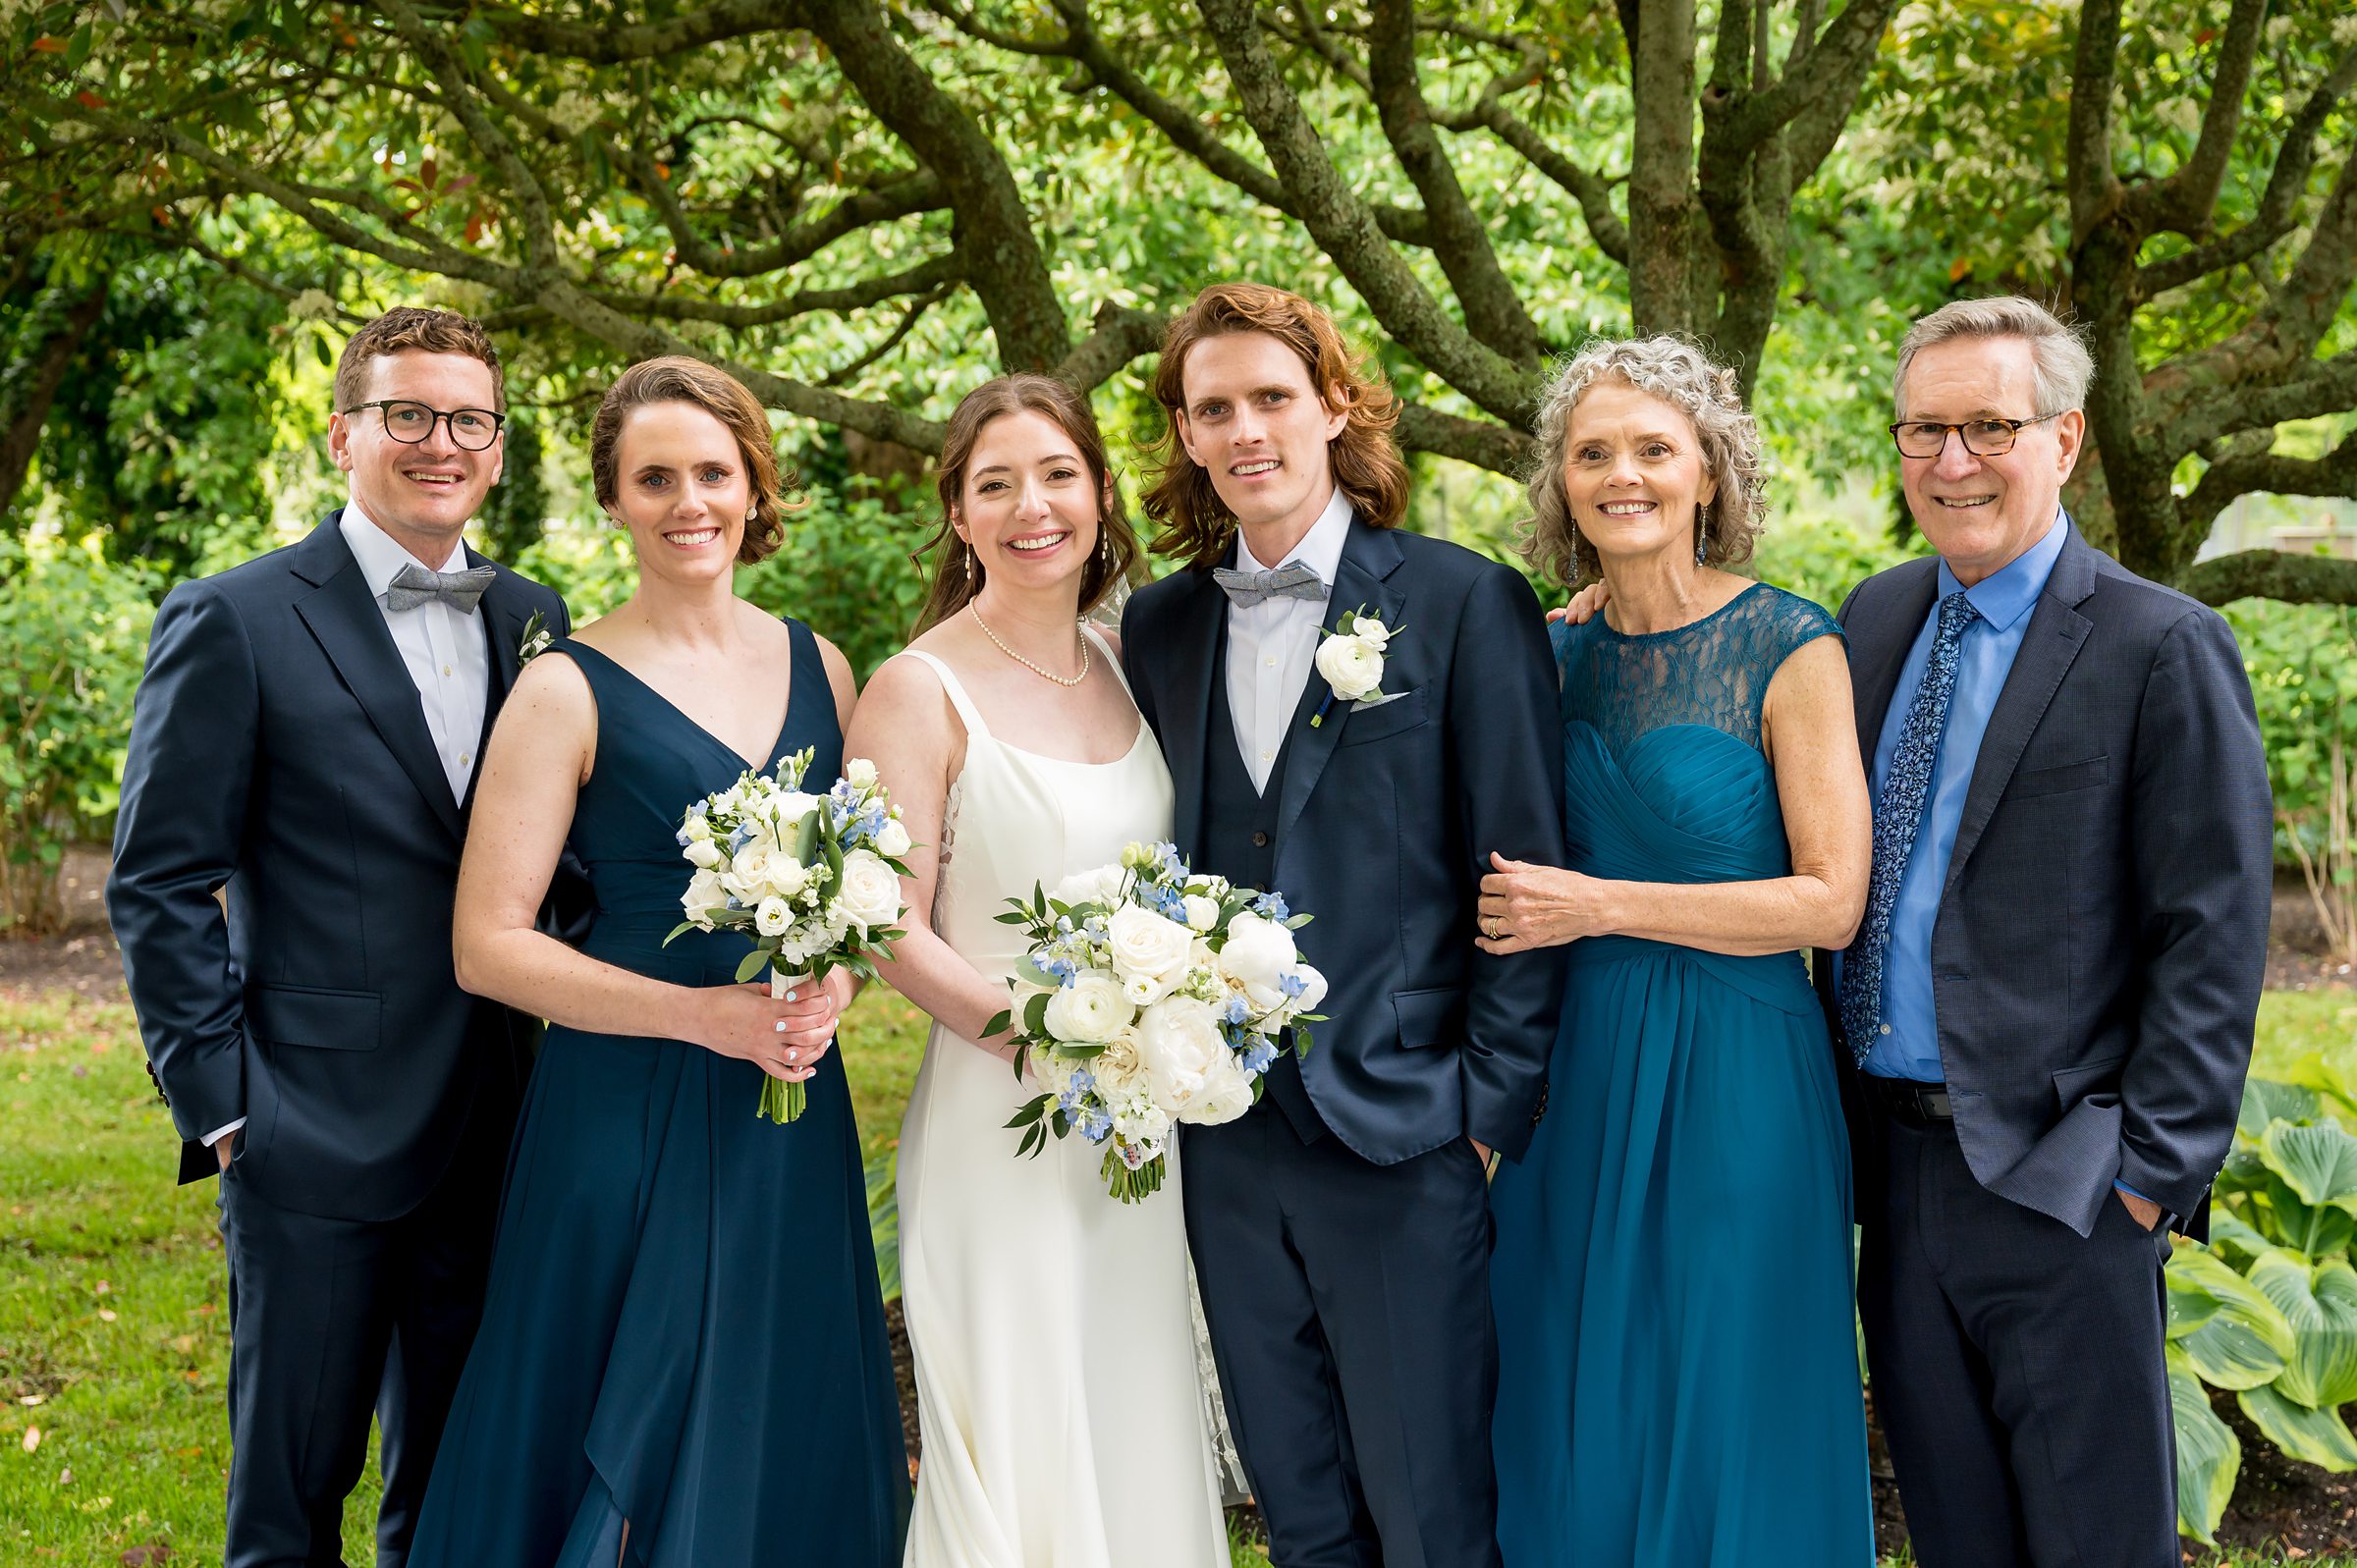 A wedding party poses outdoors in formal attire, including three men in suits and three women in teal dresses, with two holding bouquets. They stand in front of a tree with green foliage.